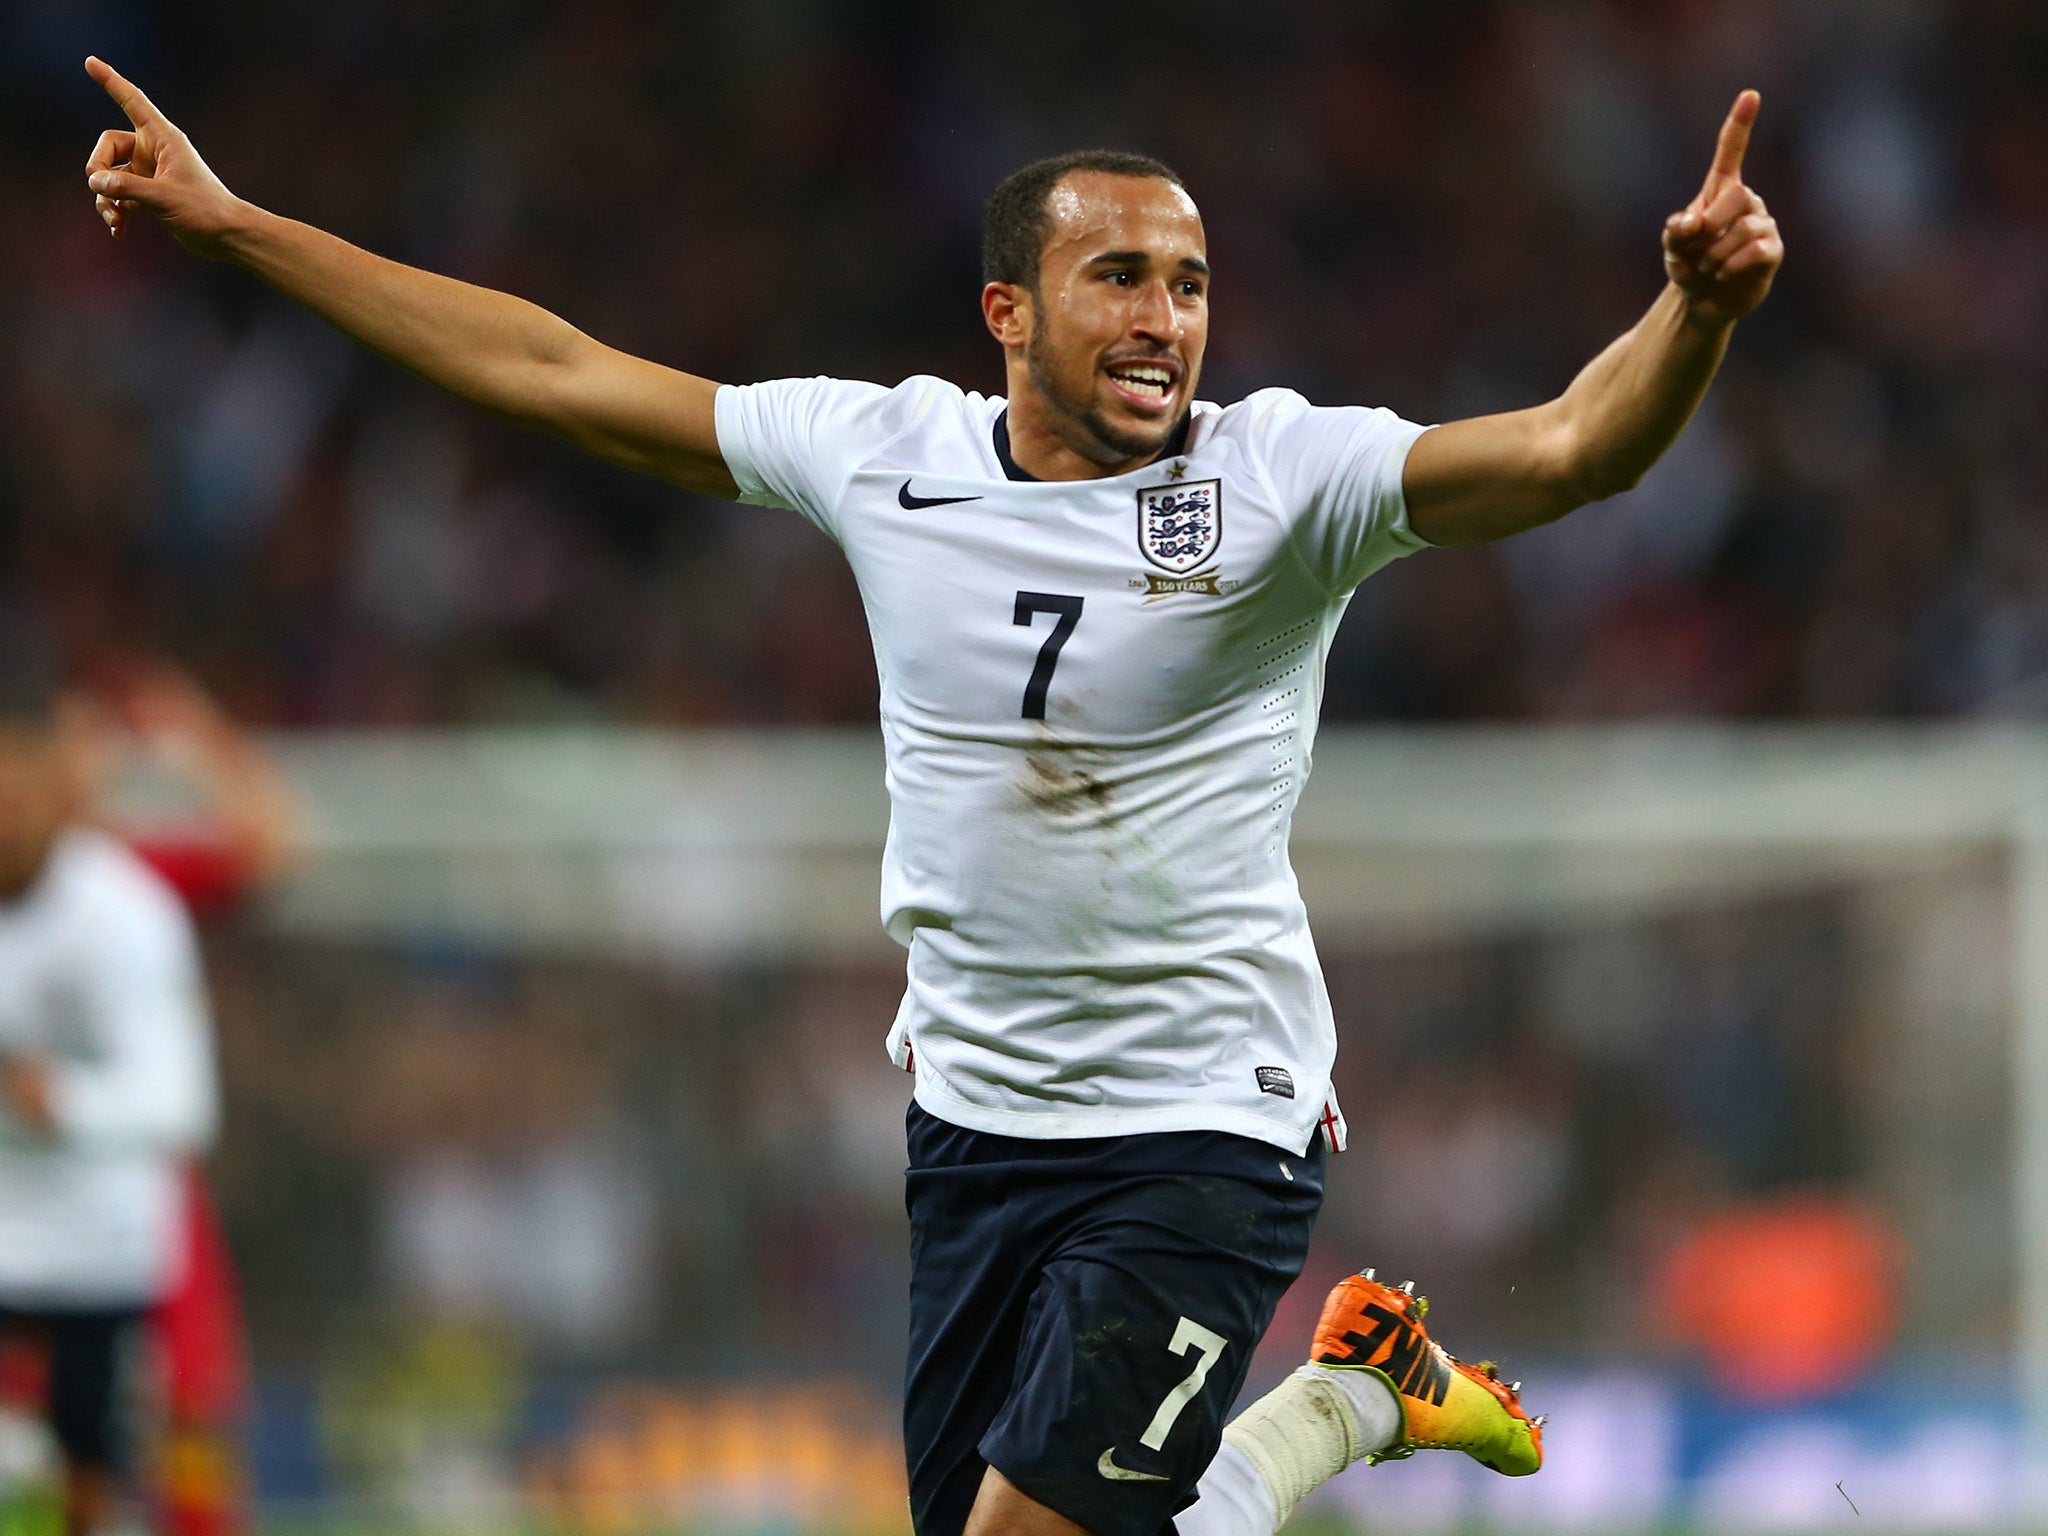 Townsend scored on his England debut three years ago